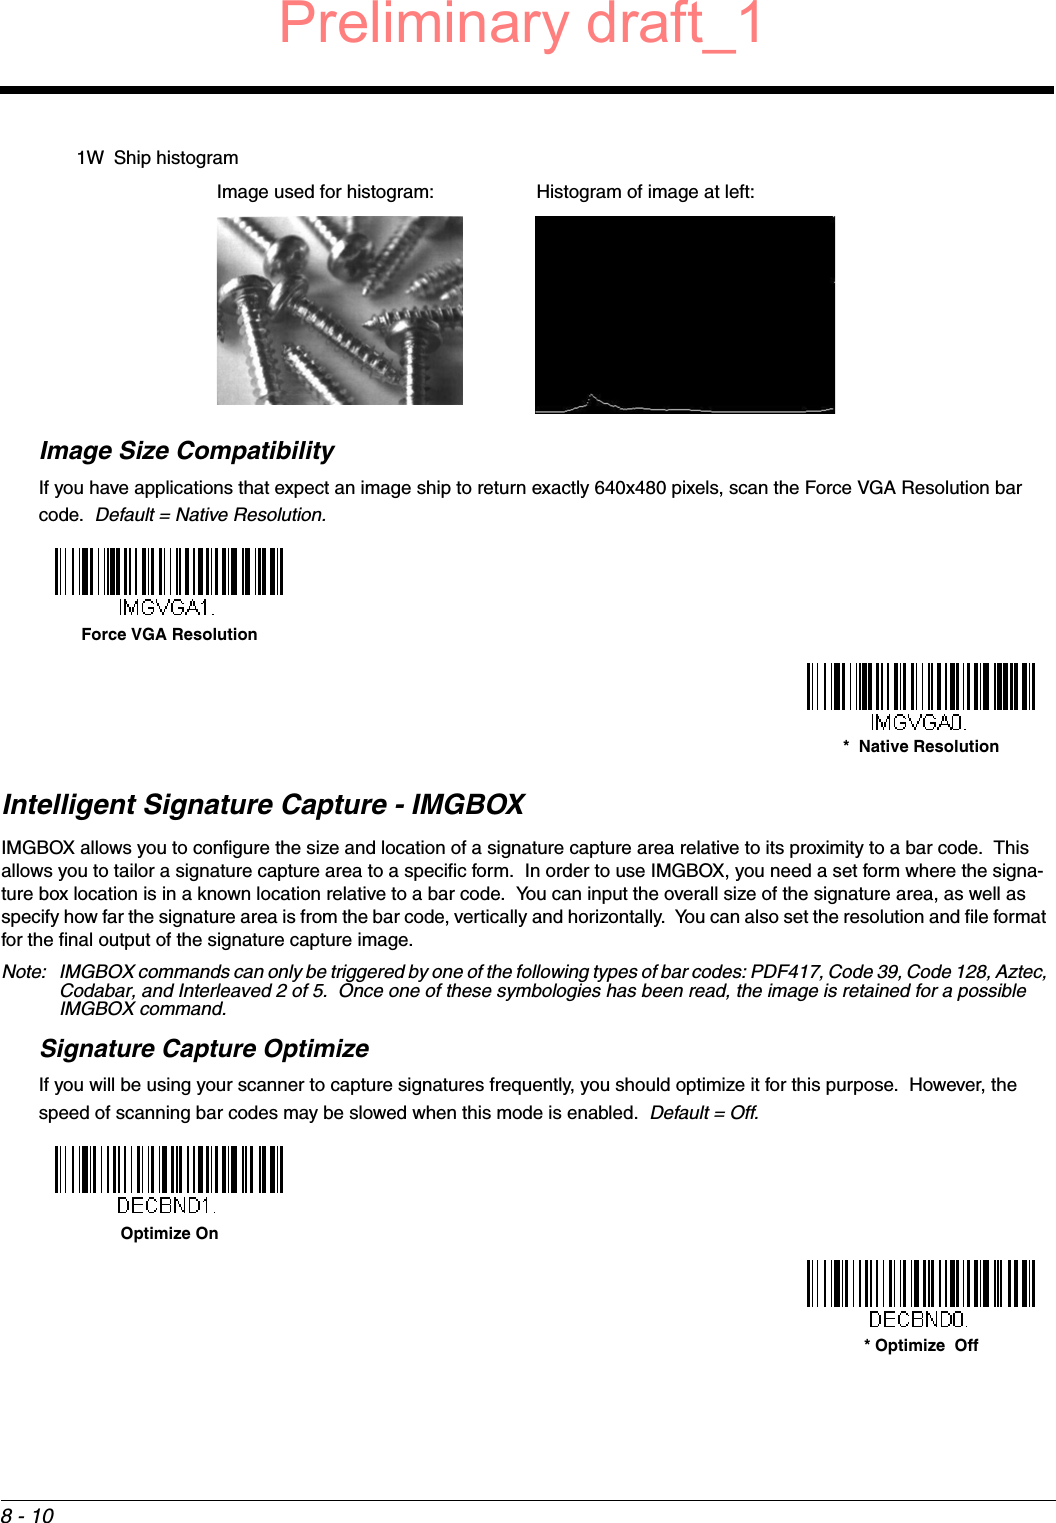 8 - 101W Ship histogramImage Size CompatibilityIf you have applications that expect an image ship to return exactly 640x480 pixels, scan the Force VGA Resolution bar code.  Default = Native Resolution.Intelligent Signature Capture - IMGBOXIMGBOX allows you to configure the size and location of a signature capture area relative to its proximity to a bar code.  This allows you to tailor a signature capture area to a specific form.  In order to use IMGBOX, you need a set form where the signa-ture box location is in a known location relative to a bar code.  You can input the overall size of the signature area, as well as specify how far the signature area is from the bar code, vertically and horizontally.  You can also set the resolution and file format for the final output of the signature capture image.Note: IMGBOX commands can only be triggered by one of the following types of bar codes: PDF417, Code 39, Code 128, Aztec, Codabar, and Interleaved 2 of 5.  Once one of these symbologies has been read, the image is retained for a possible IMGBOX command.Signature Capture OptimizeIf you will be using your scanner to capture signatures frequently, you should optimize it for this purpose.  However, the speed of scanning bar codes may be slowed when this mode is enabled.  Default = Off.Image used for histogram: Histogram of image at left:Force VGA Resolution*  Native ResolutionOptimize On* Optimize  OffPreliminary draft_1